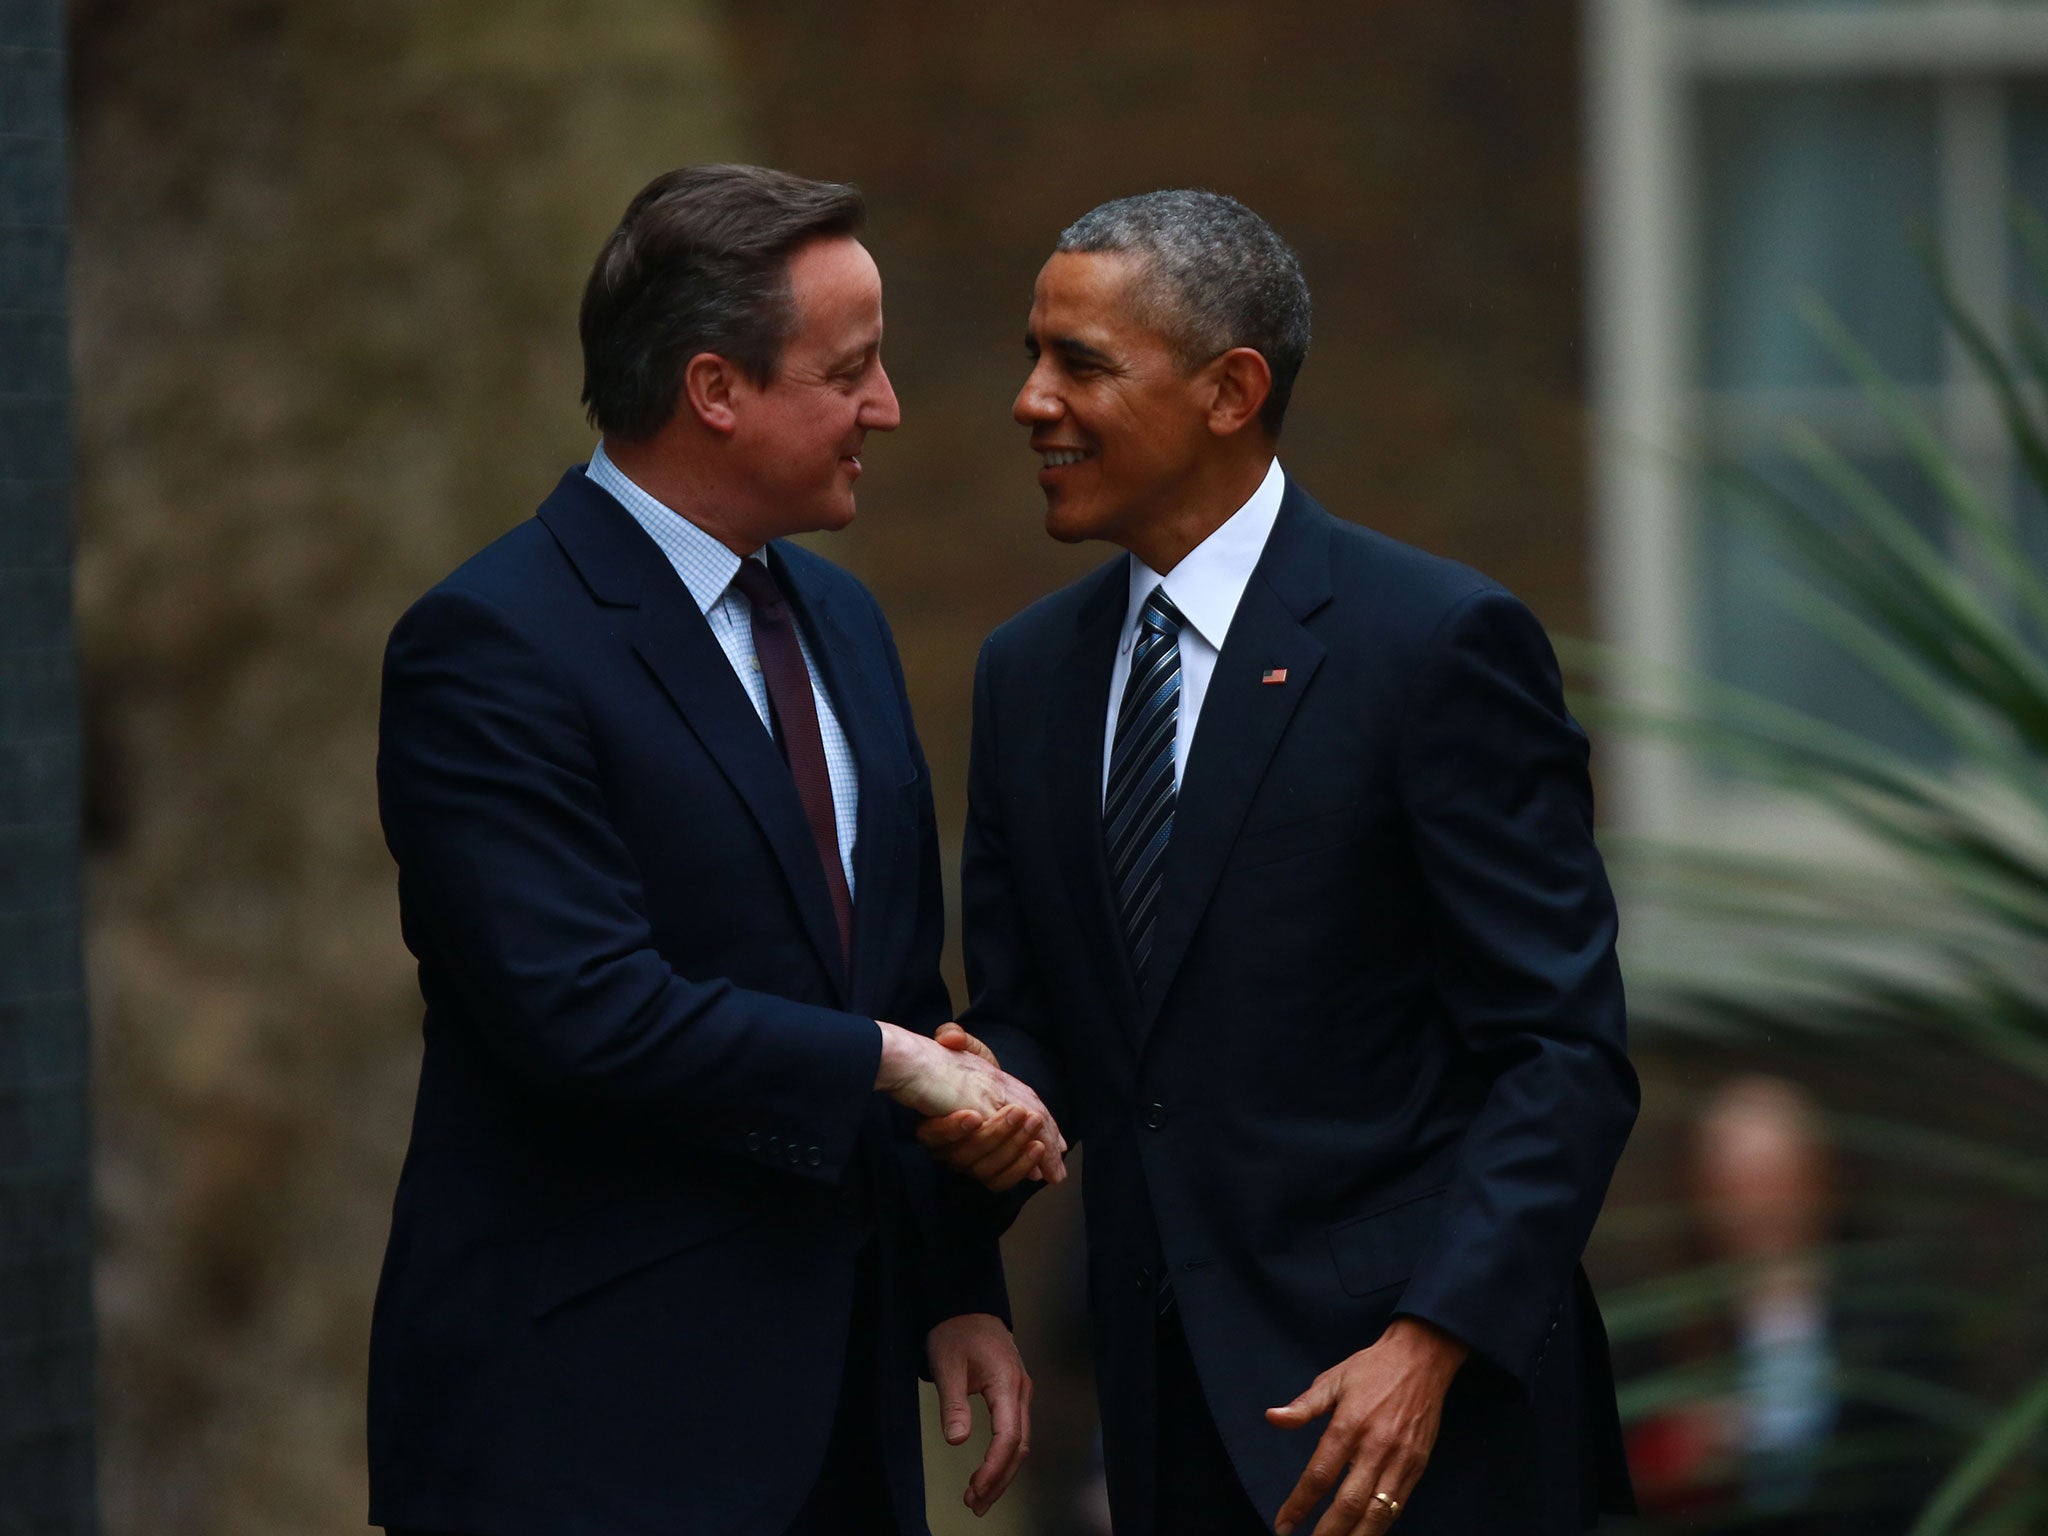 Prime Minister David Cameron greets President Obama during a visit to Britain